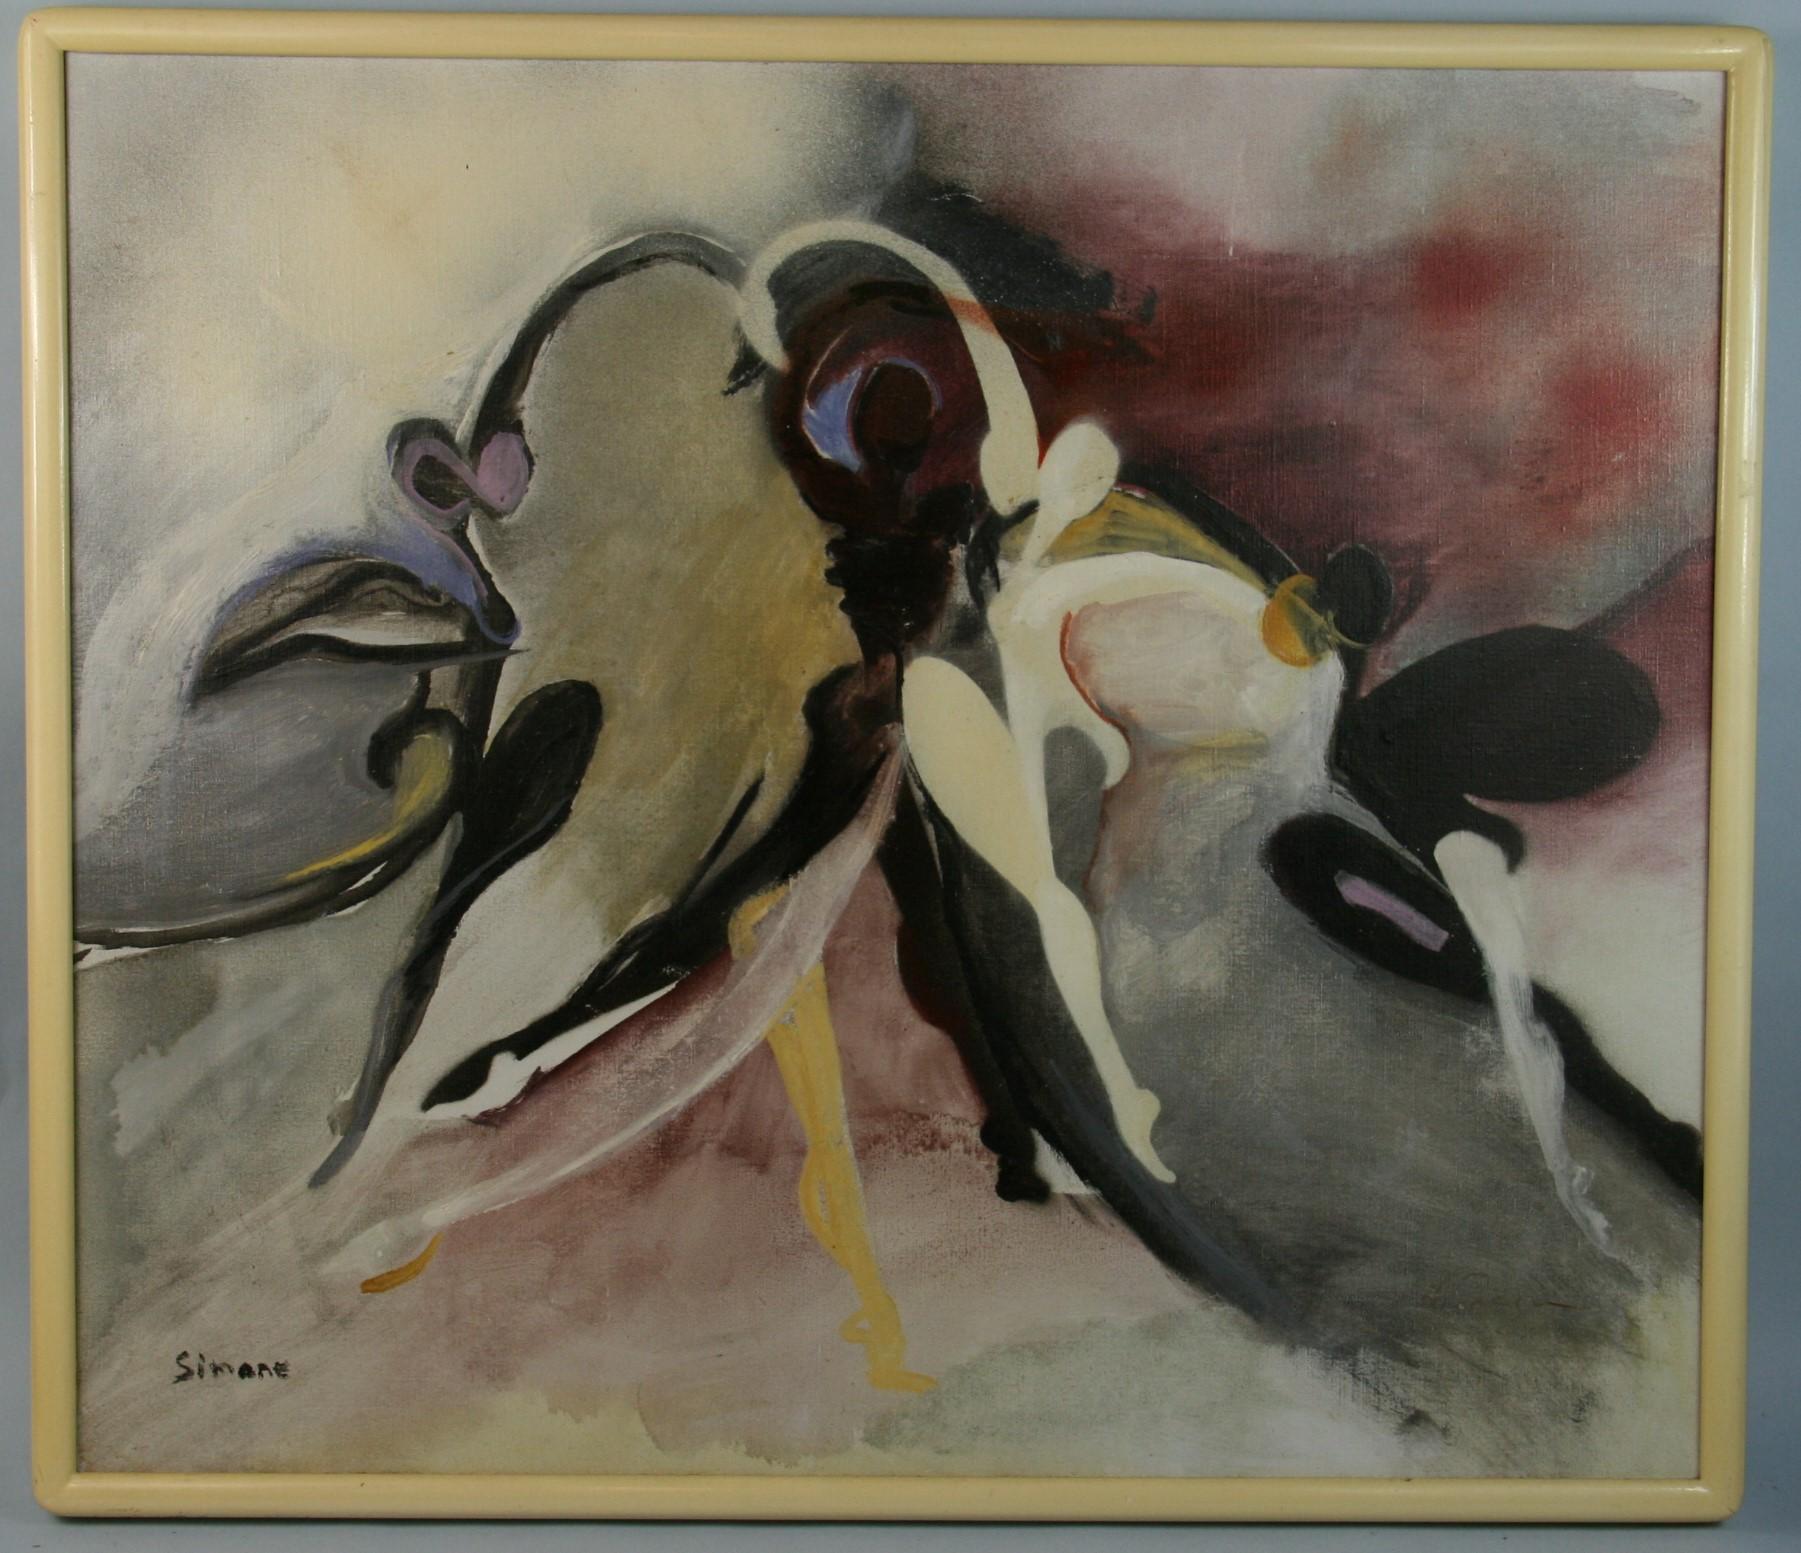 Unknown Abstract Painting - Surreal Italian Oversized Black and White  Dancers Oil Painting  by Simone 1960